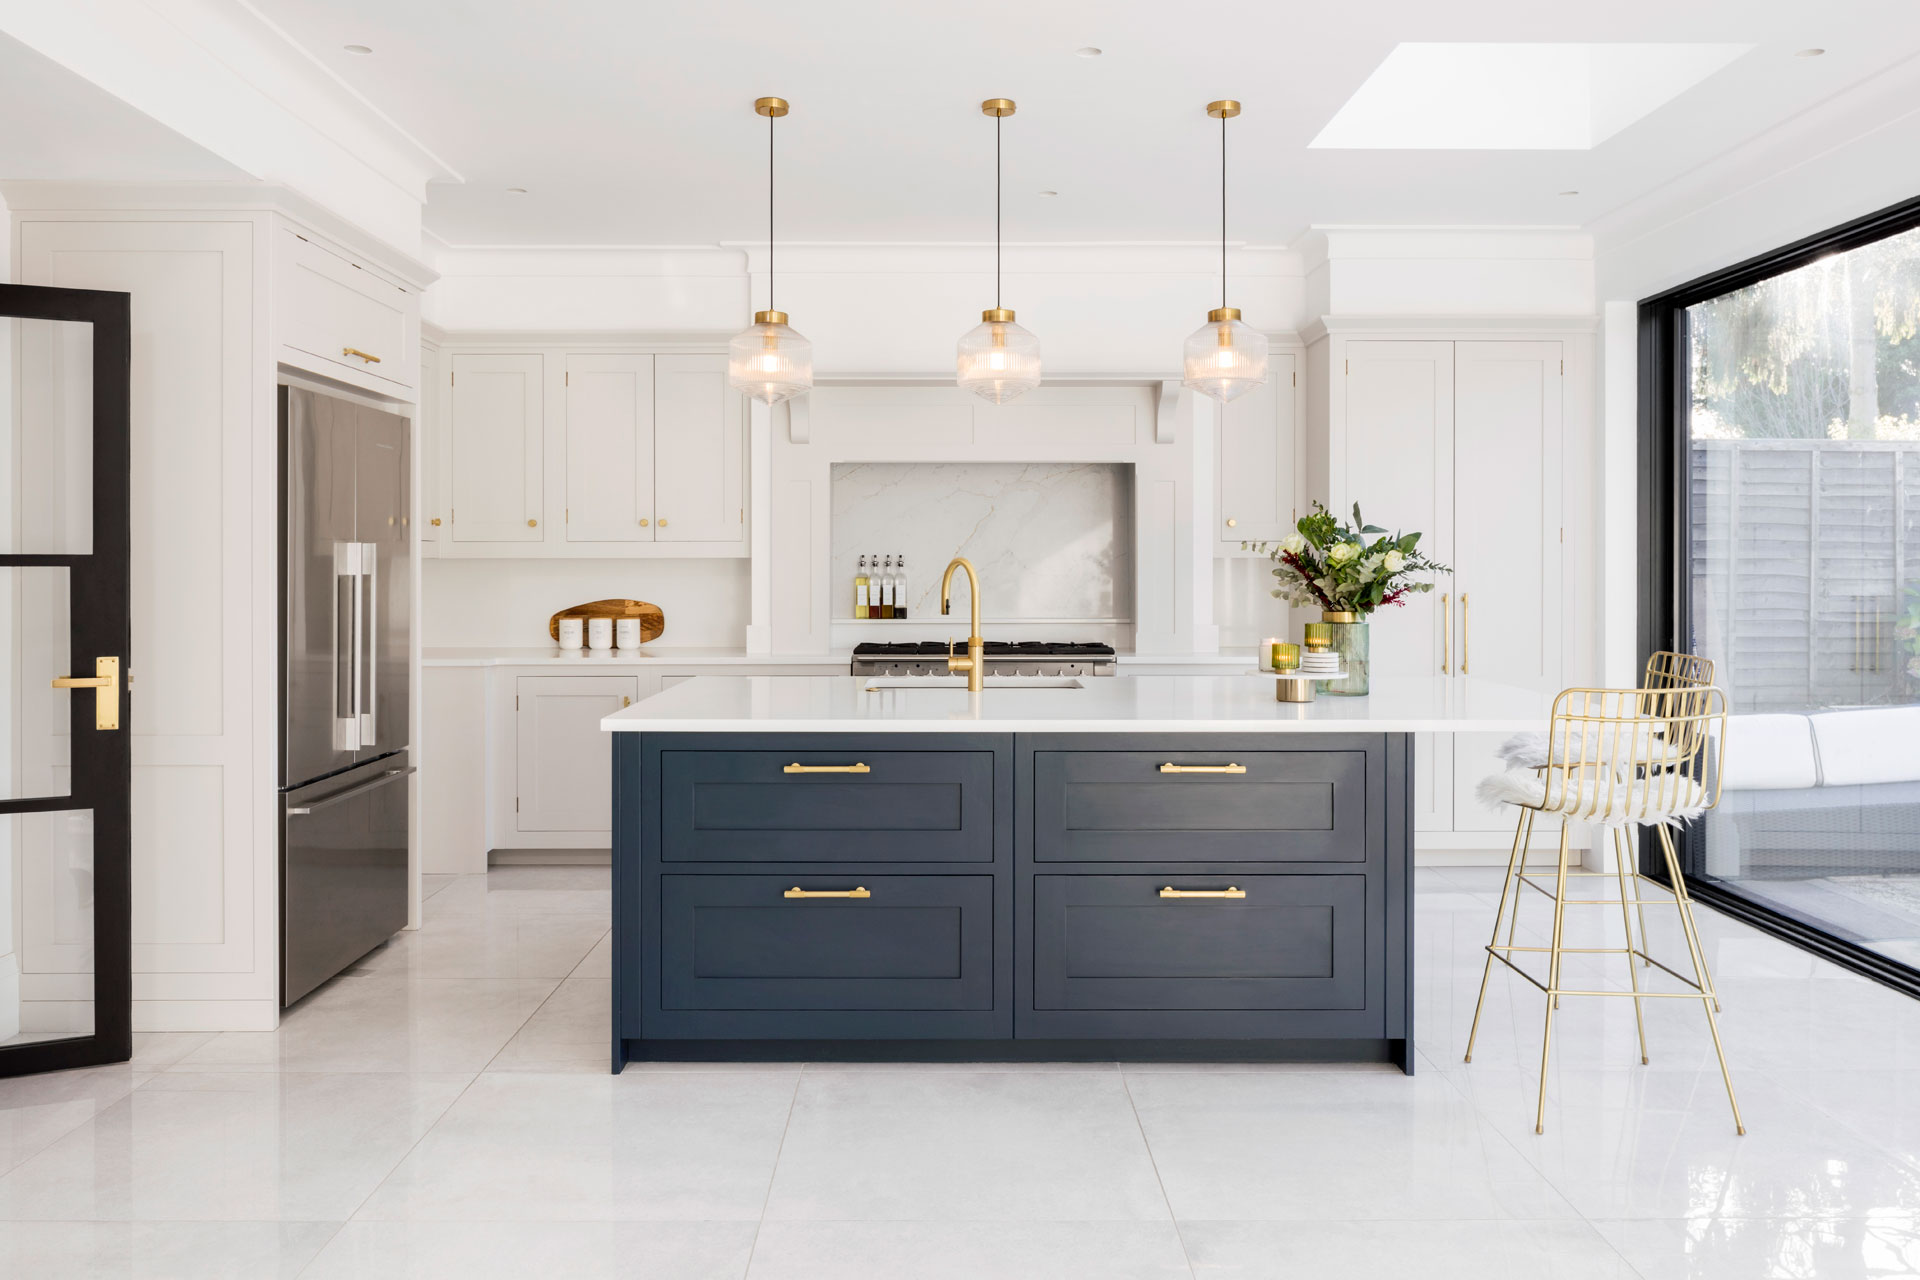 Navy blue kitchen island with white countertops and floors.